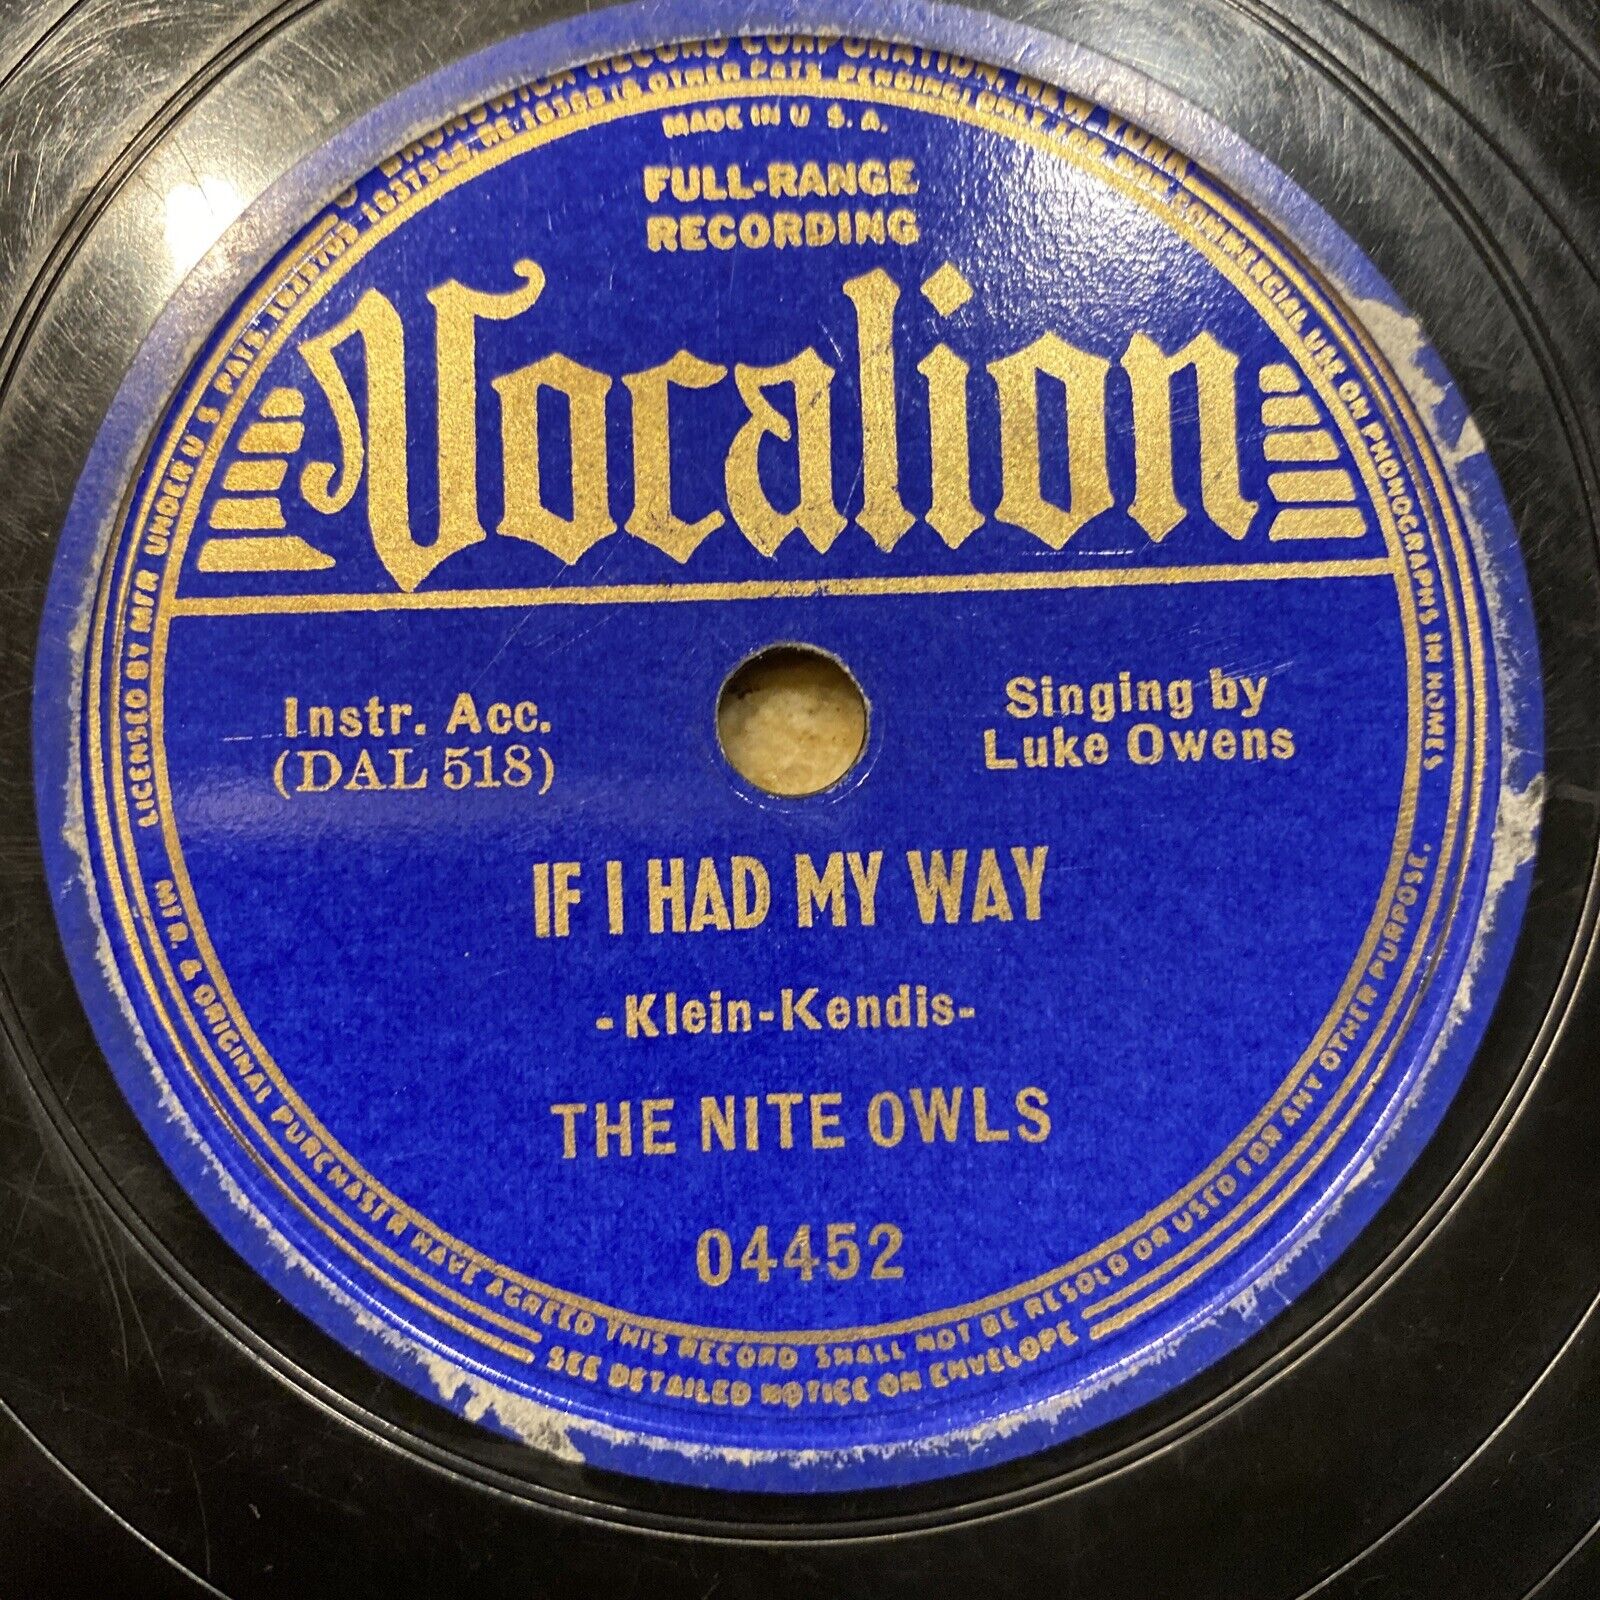 The Night Owls 78 rpm VOCALION 04452 IF I HAD MY WAY Country steel guitar V